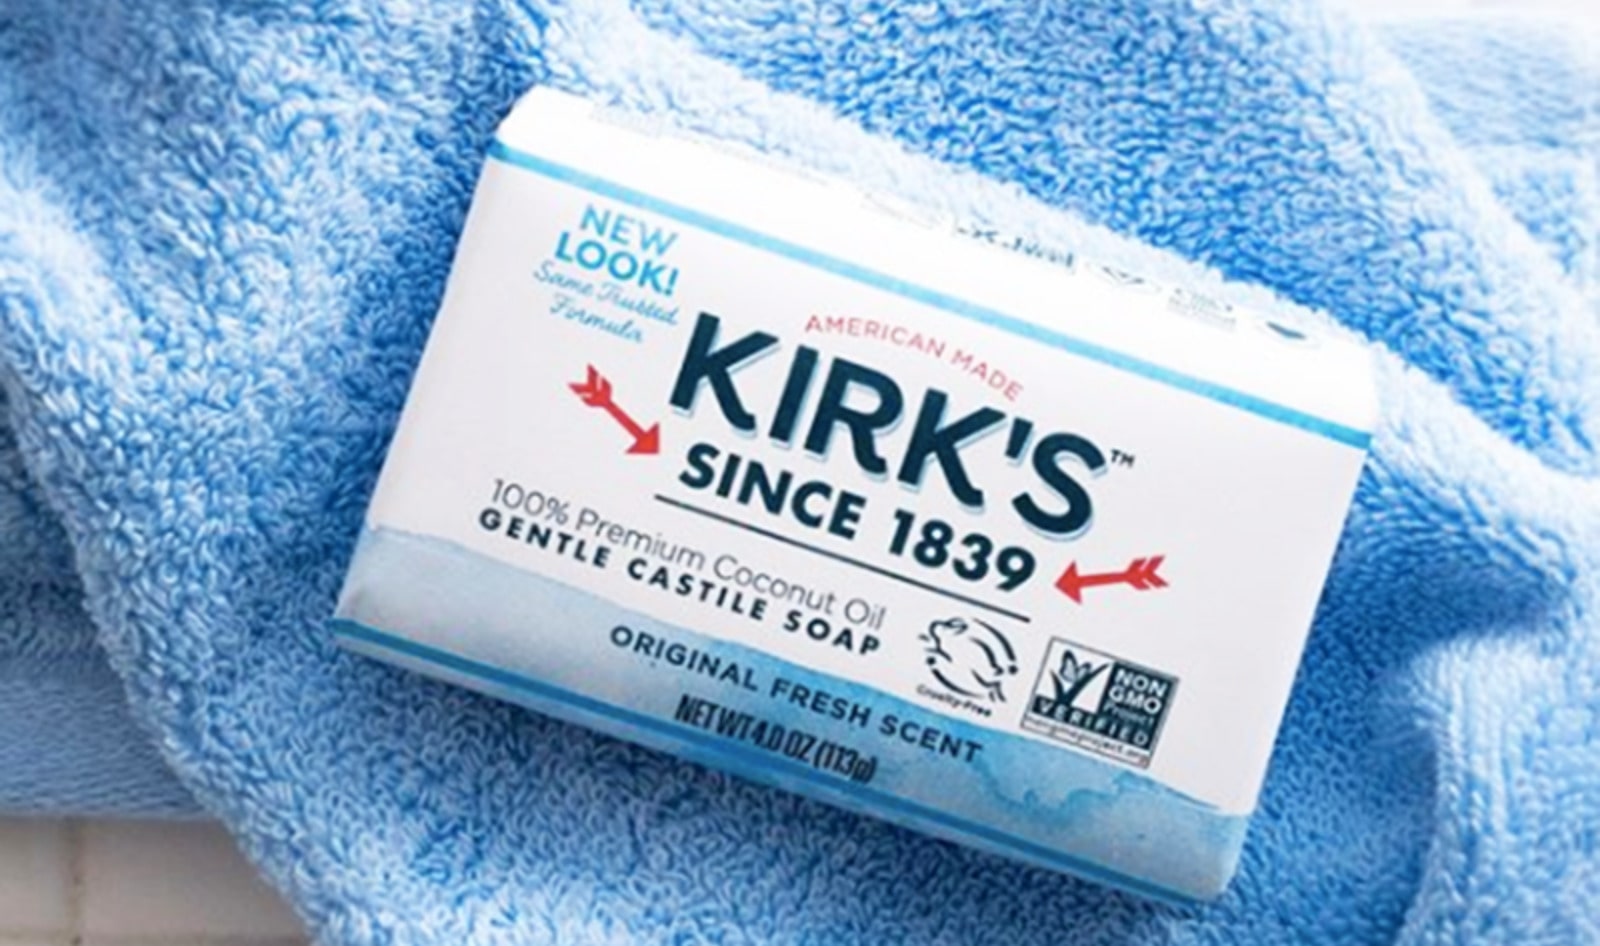 180-Year-Old Soap Brand Adds “Vegan” to Label to Appeal to Millennials